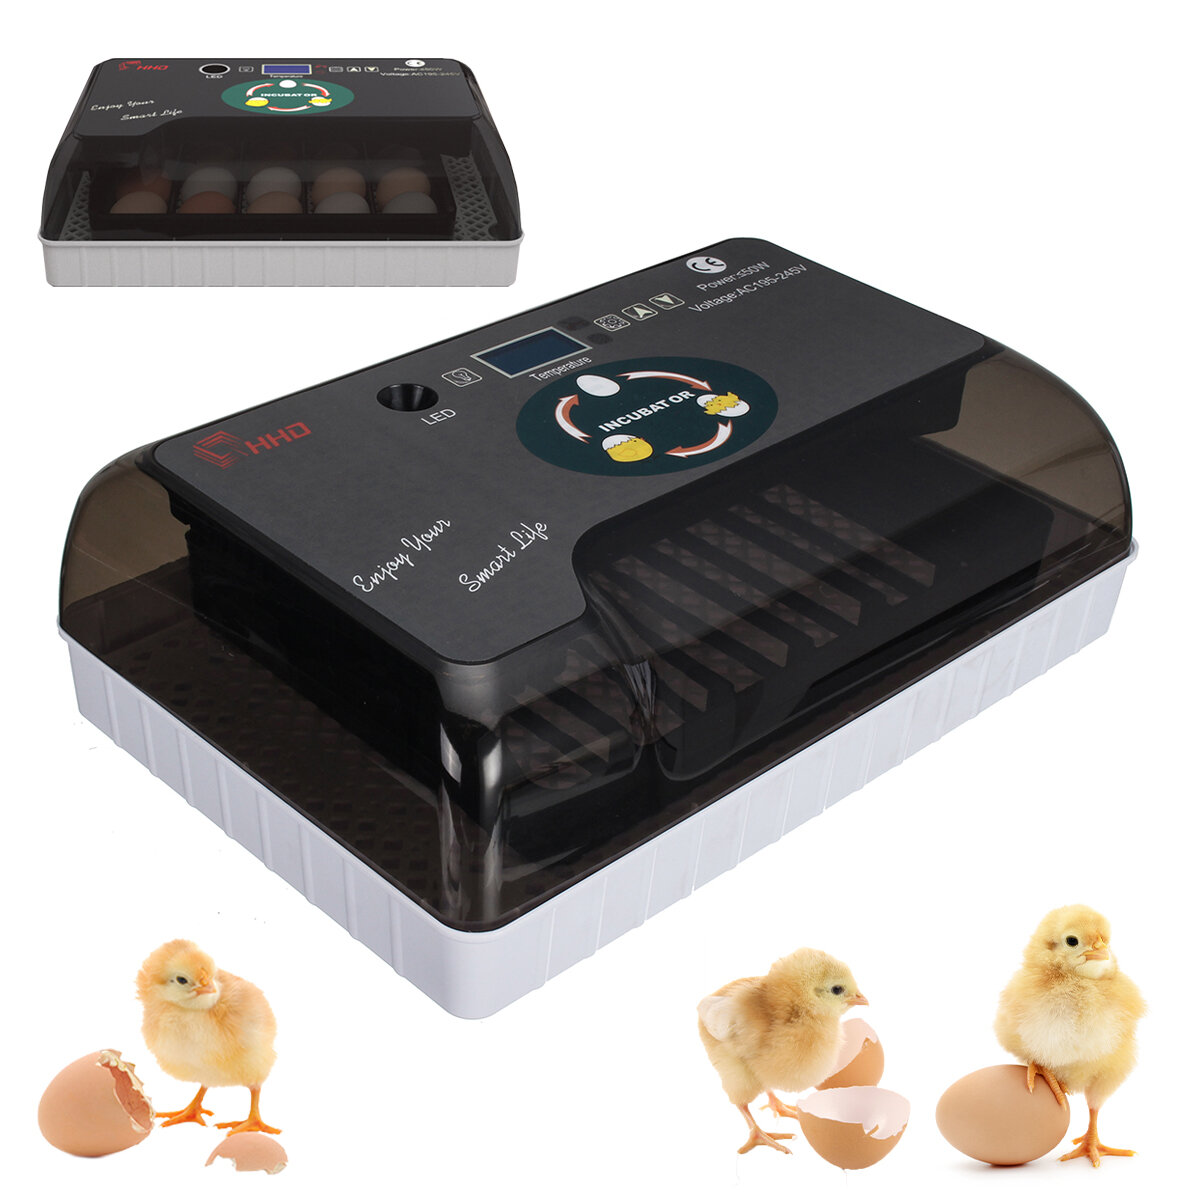 Image of AC 110-220V 20 Eggs Incubator Hatching Chicks Fully Automatic Poultry Hatching Machine Egg Turn